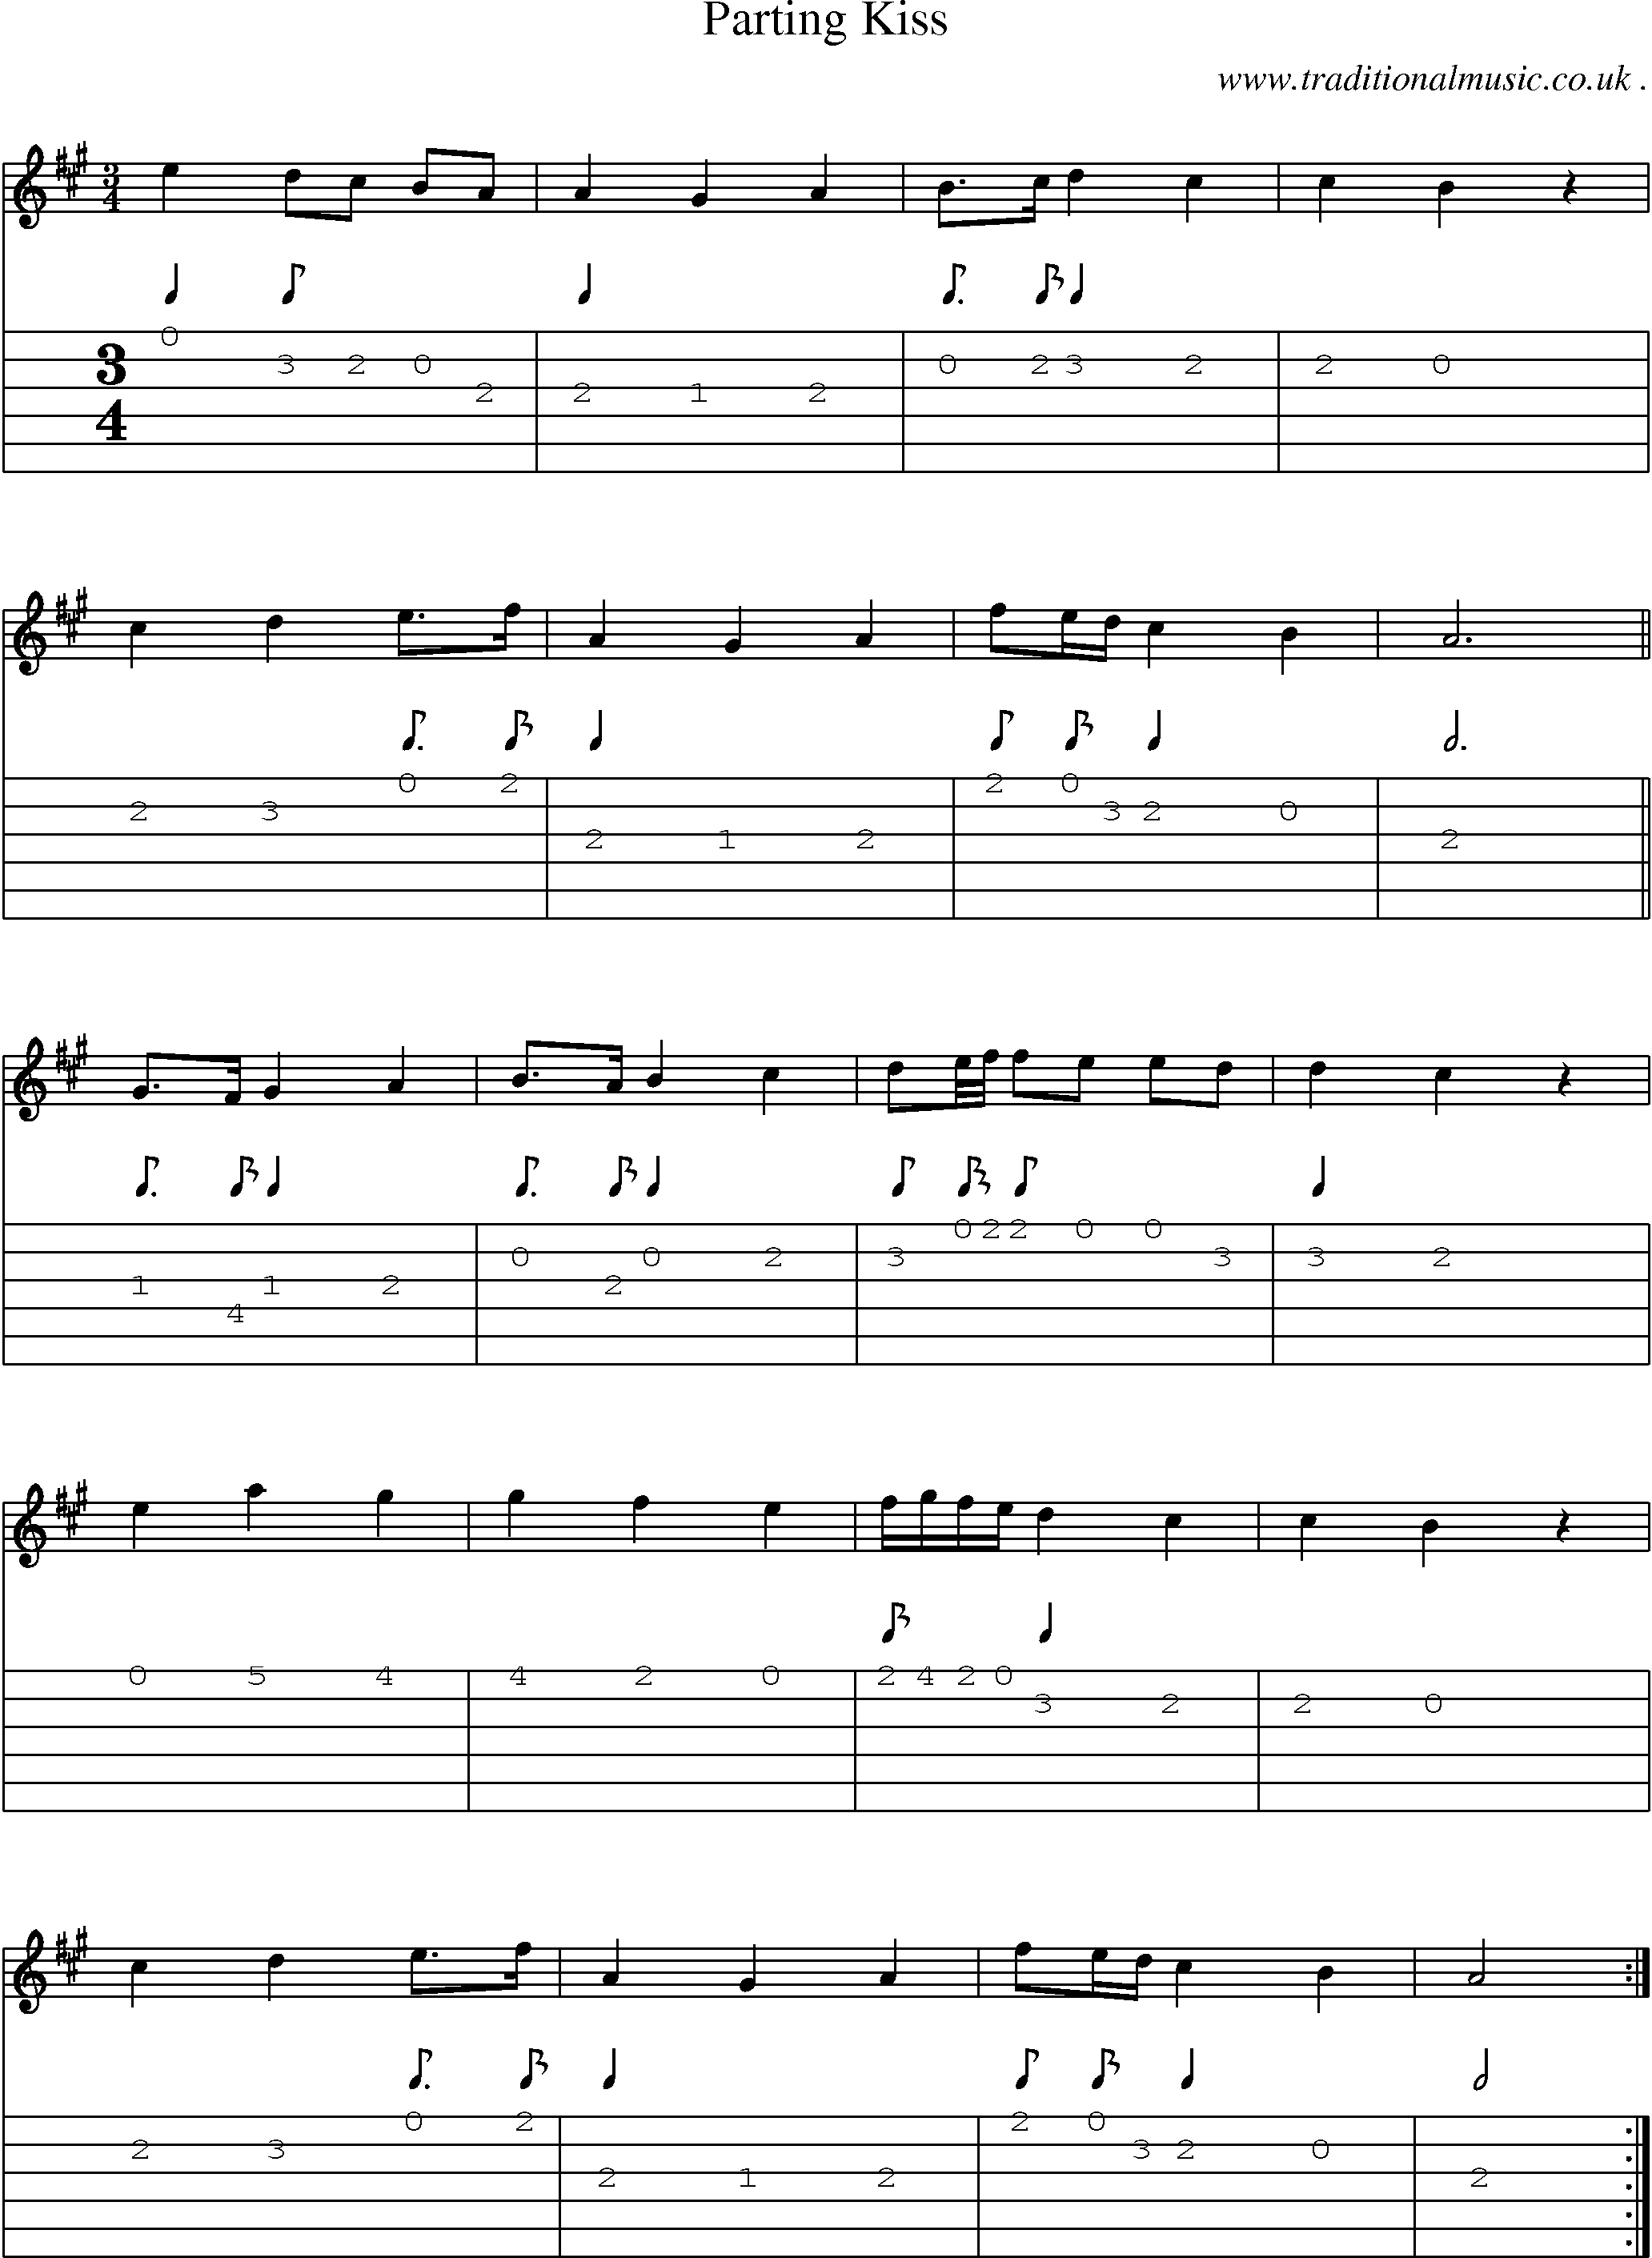 Sheet-Music and Guitar Tabs for Parting Kiss